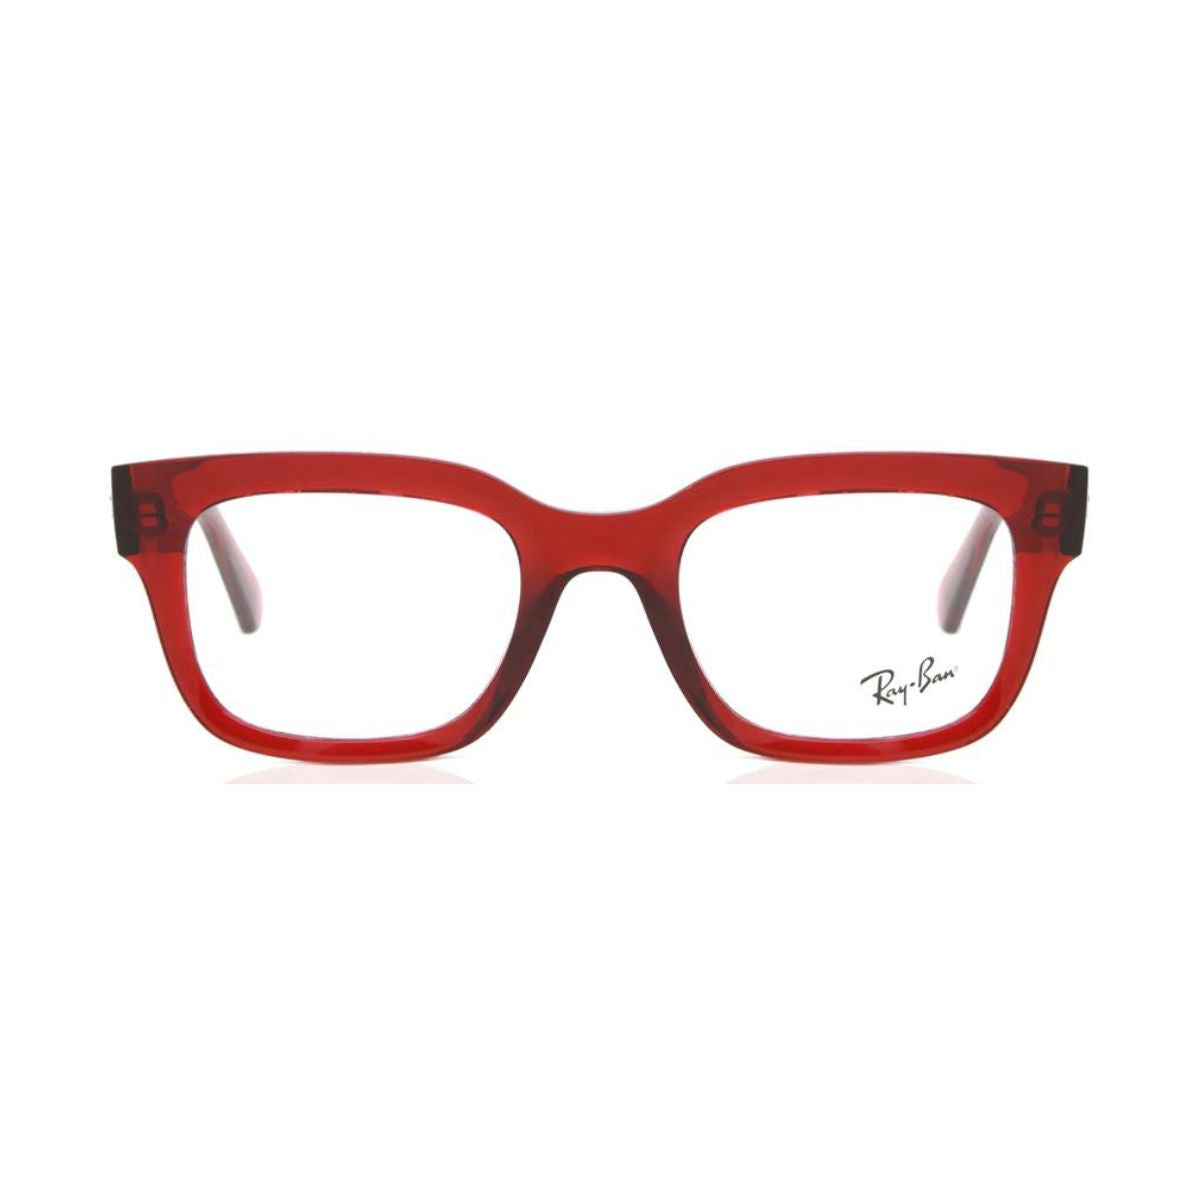 "buy Rayban 7217 8265 transparent red color frame for men's and women's at optorium"